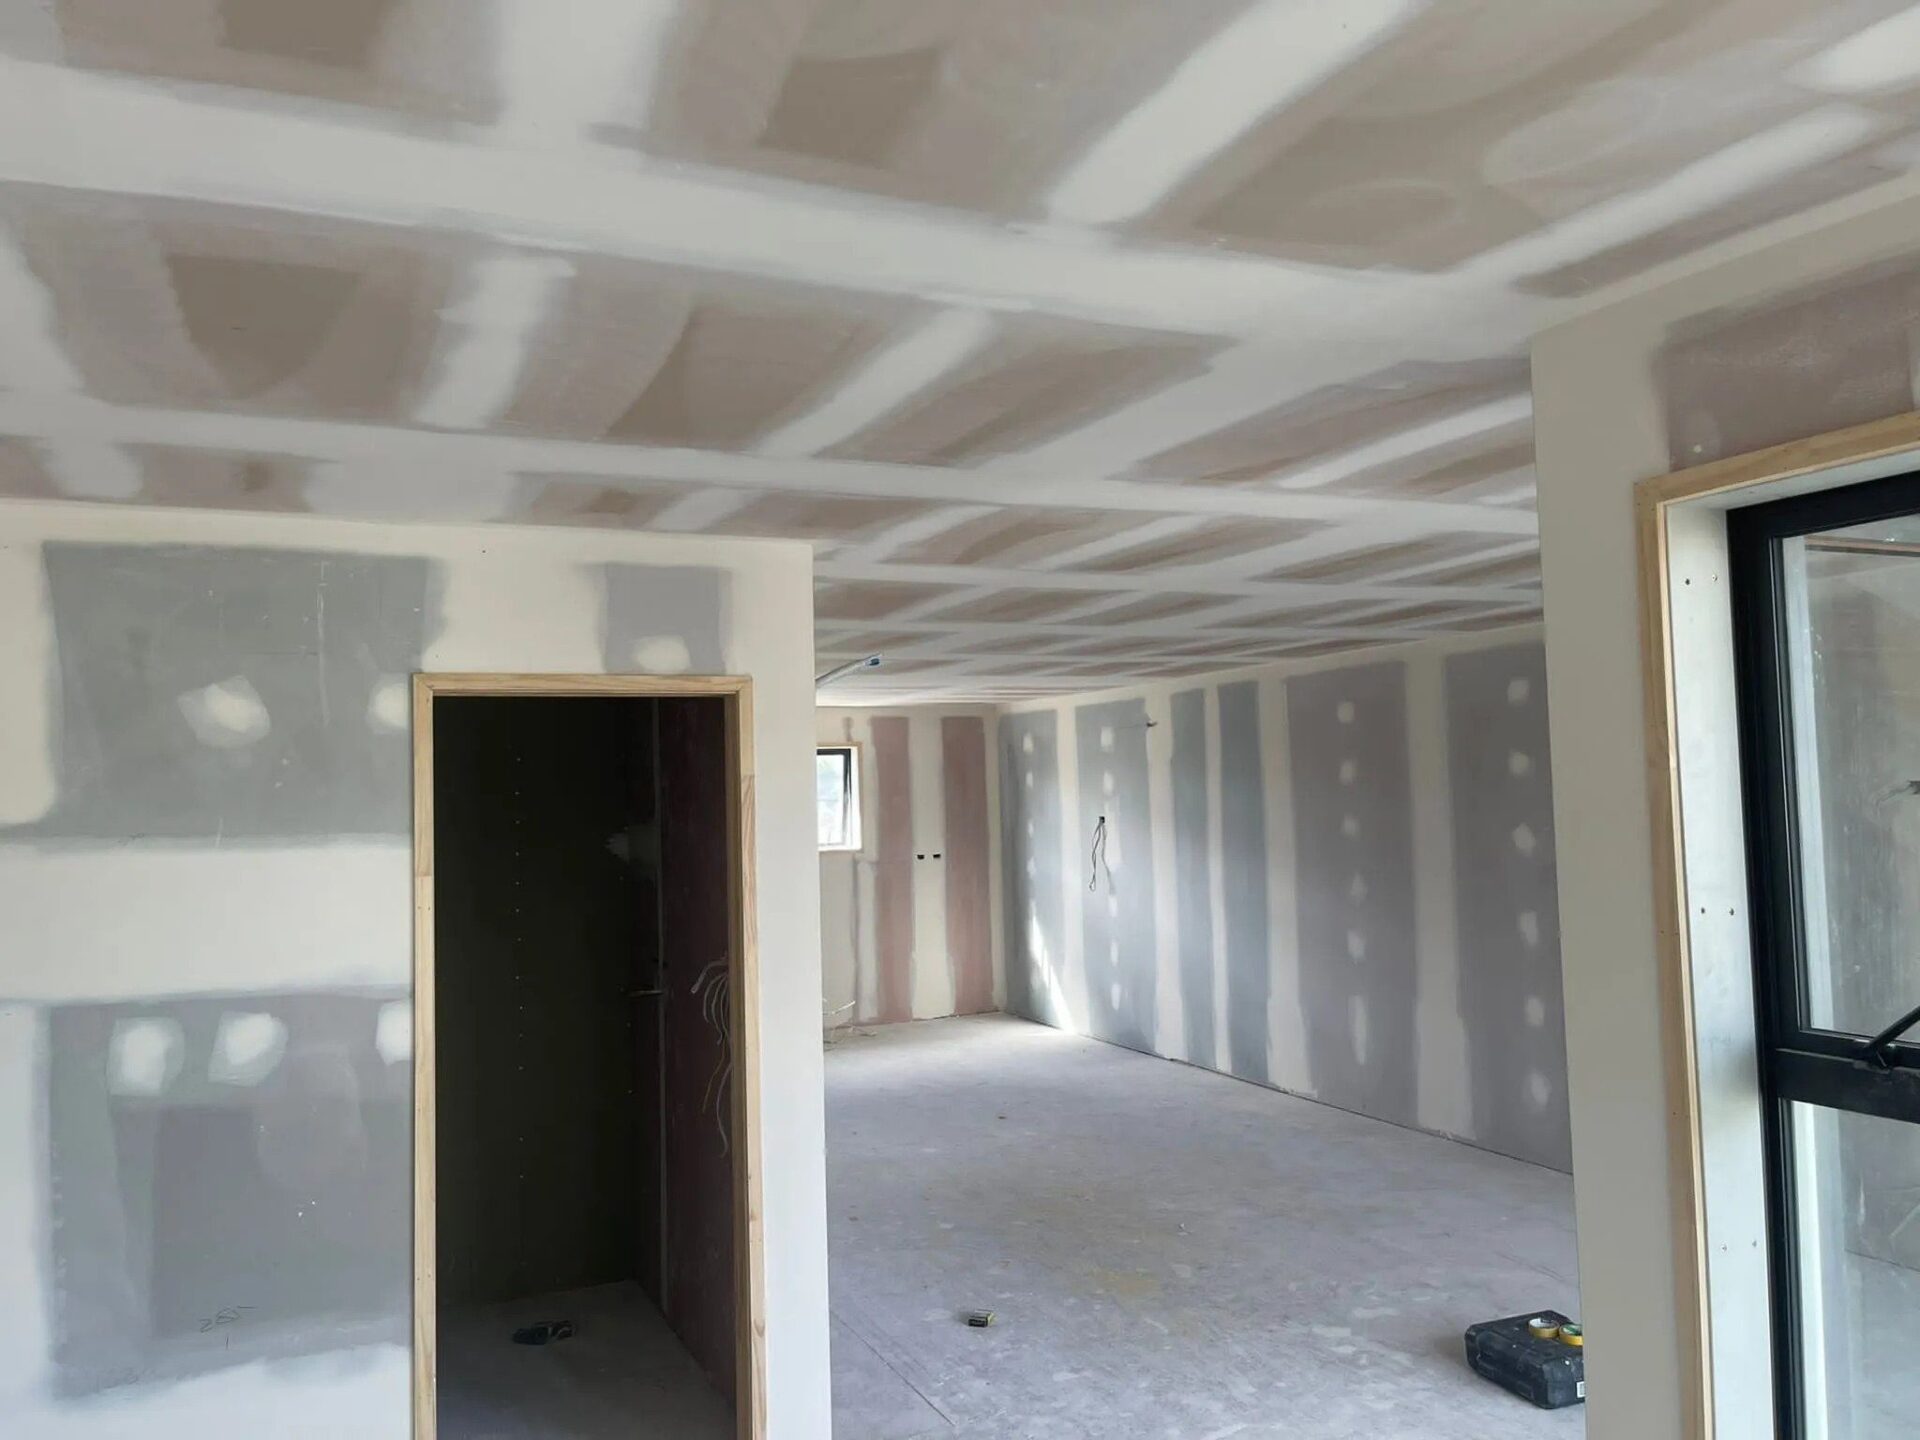 How to Achieve Smooth Plaster Walls with GIB Stopping and Lining